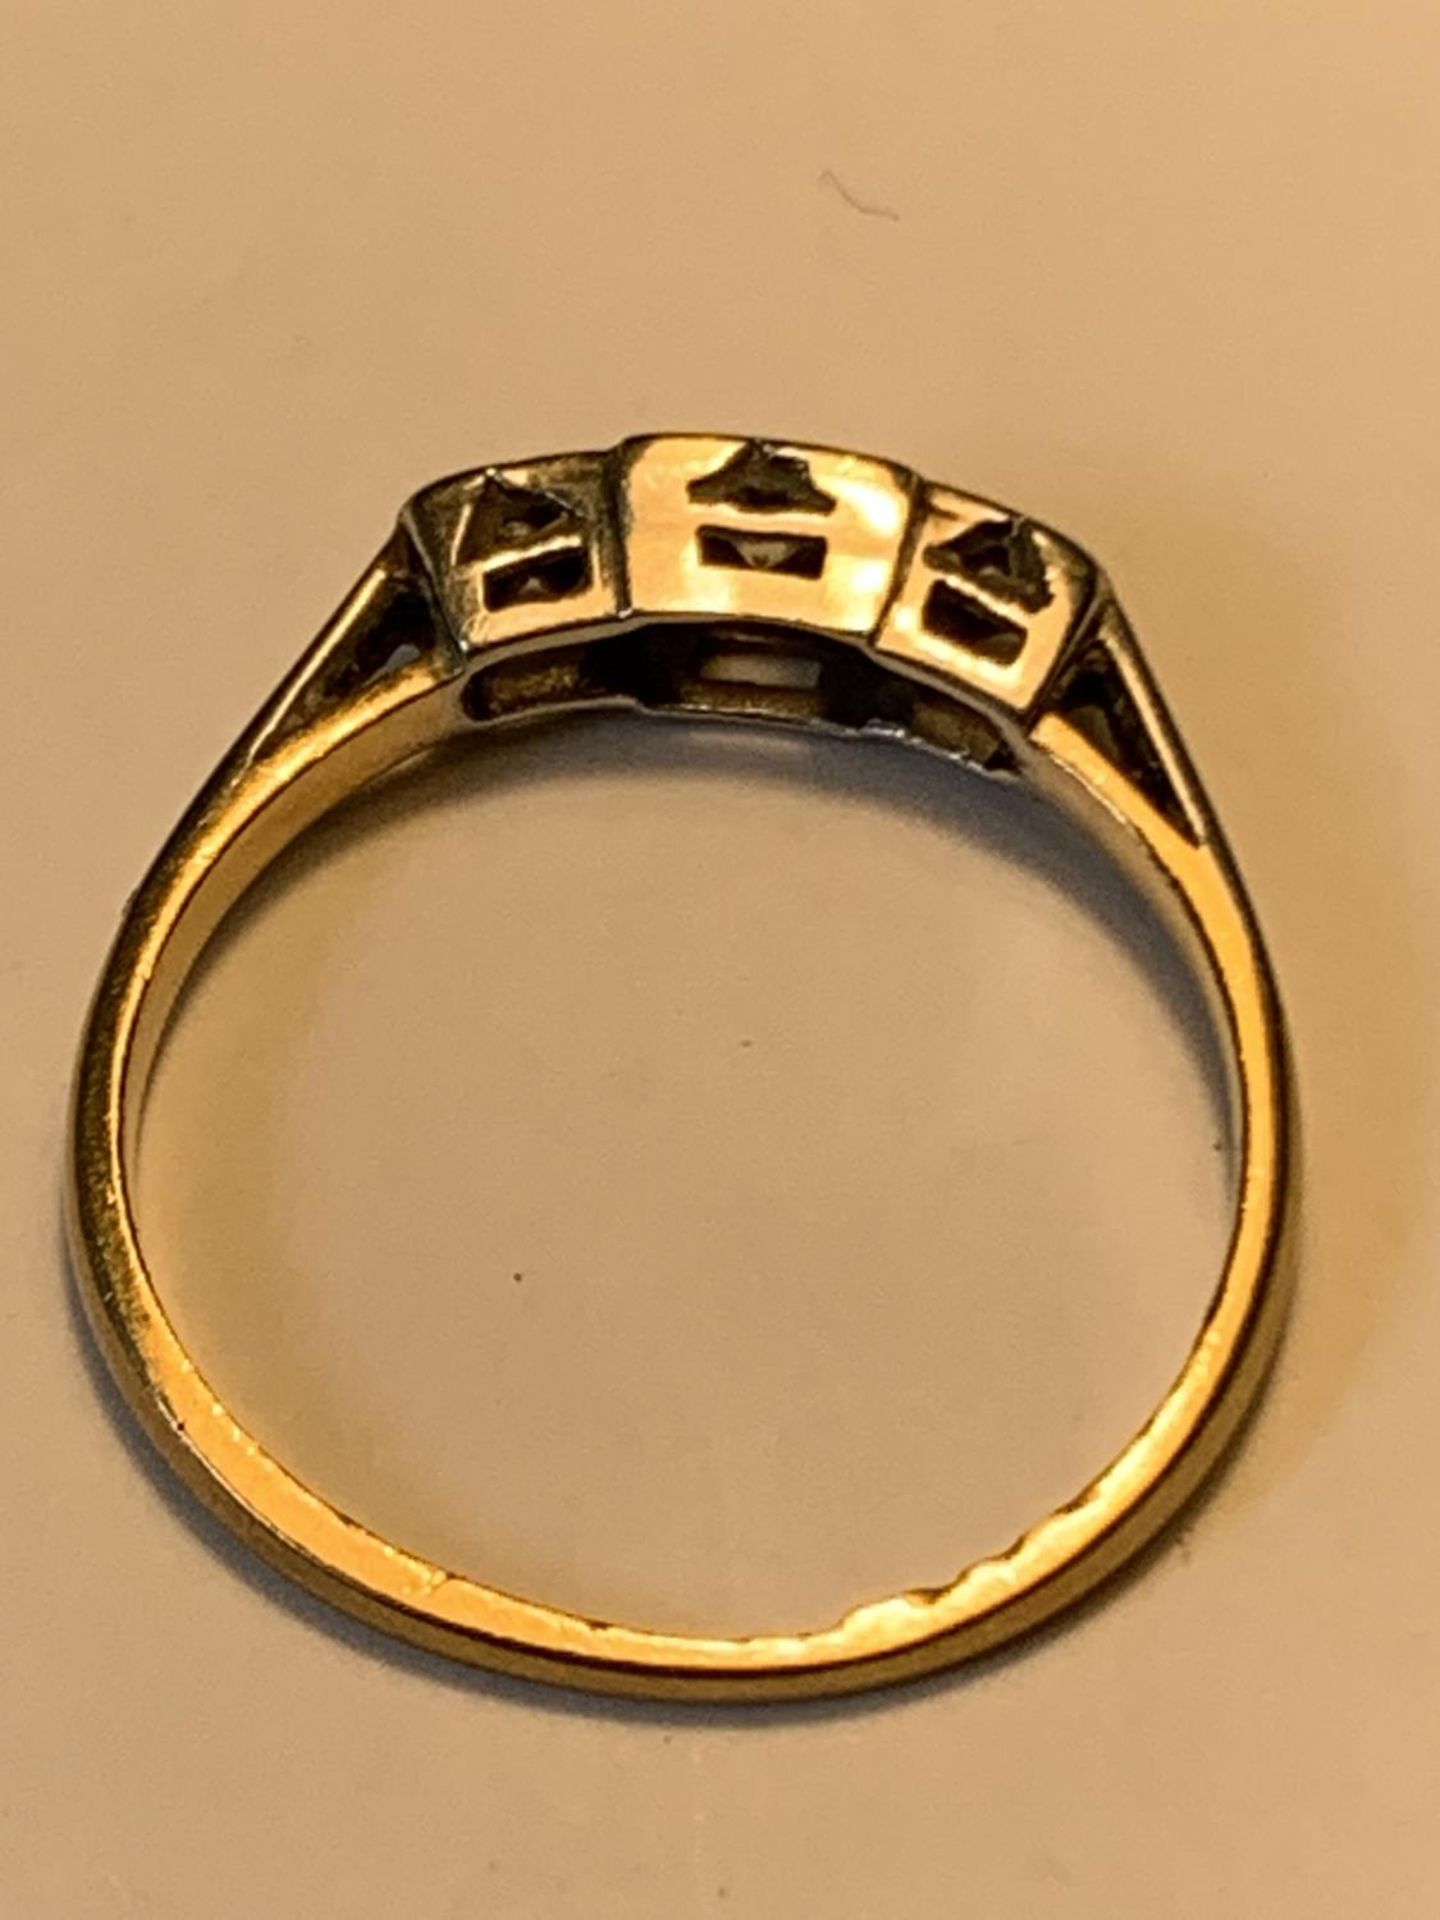 AN 18 CARAT GOLD RING WITH THREE IN LINE DIAMONDS SIZE M/N - Image 4 of 4